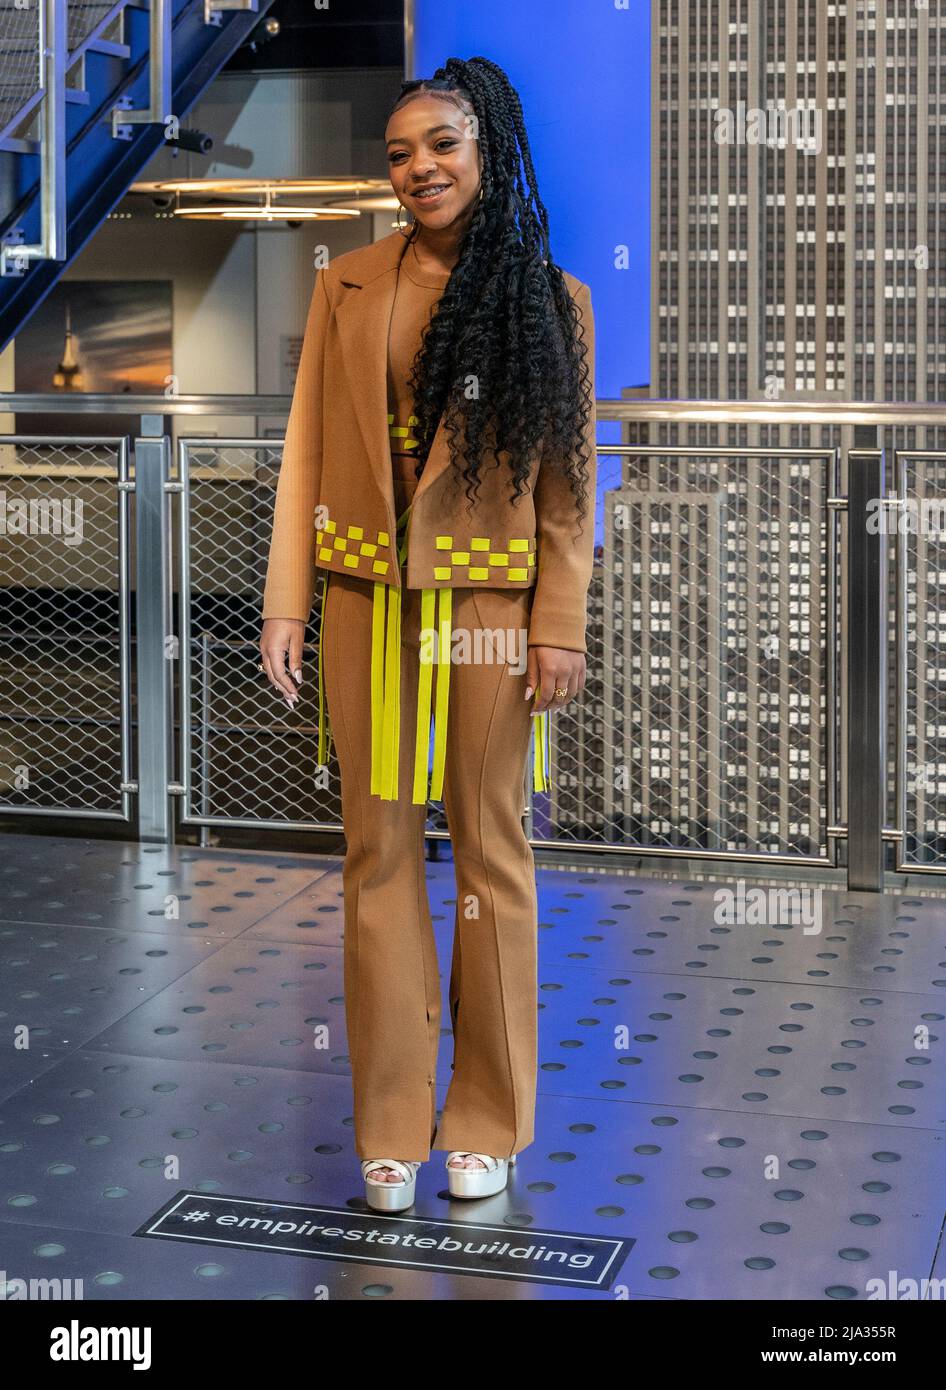 New York, NY - May 26, 2022: Priah Ferguson from Stranger Things attends ceremonial lighting of Empire State Building ahead of global event for season 4 premiere Stock Photo